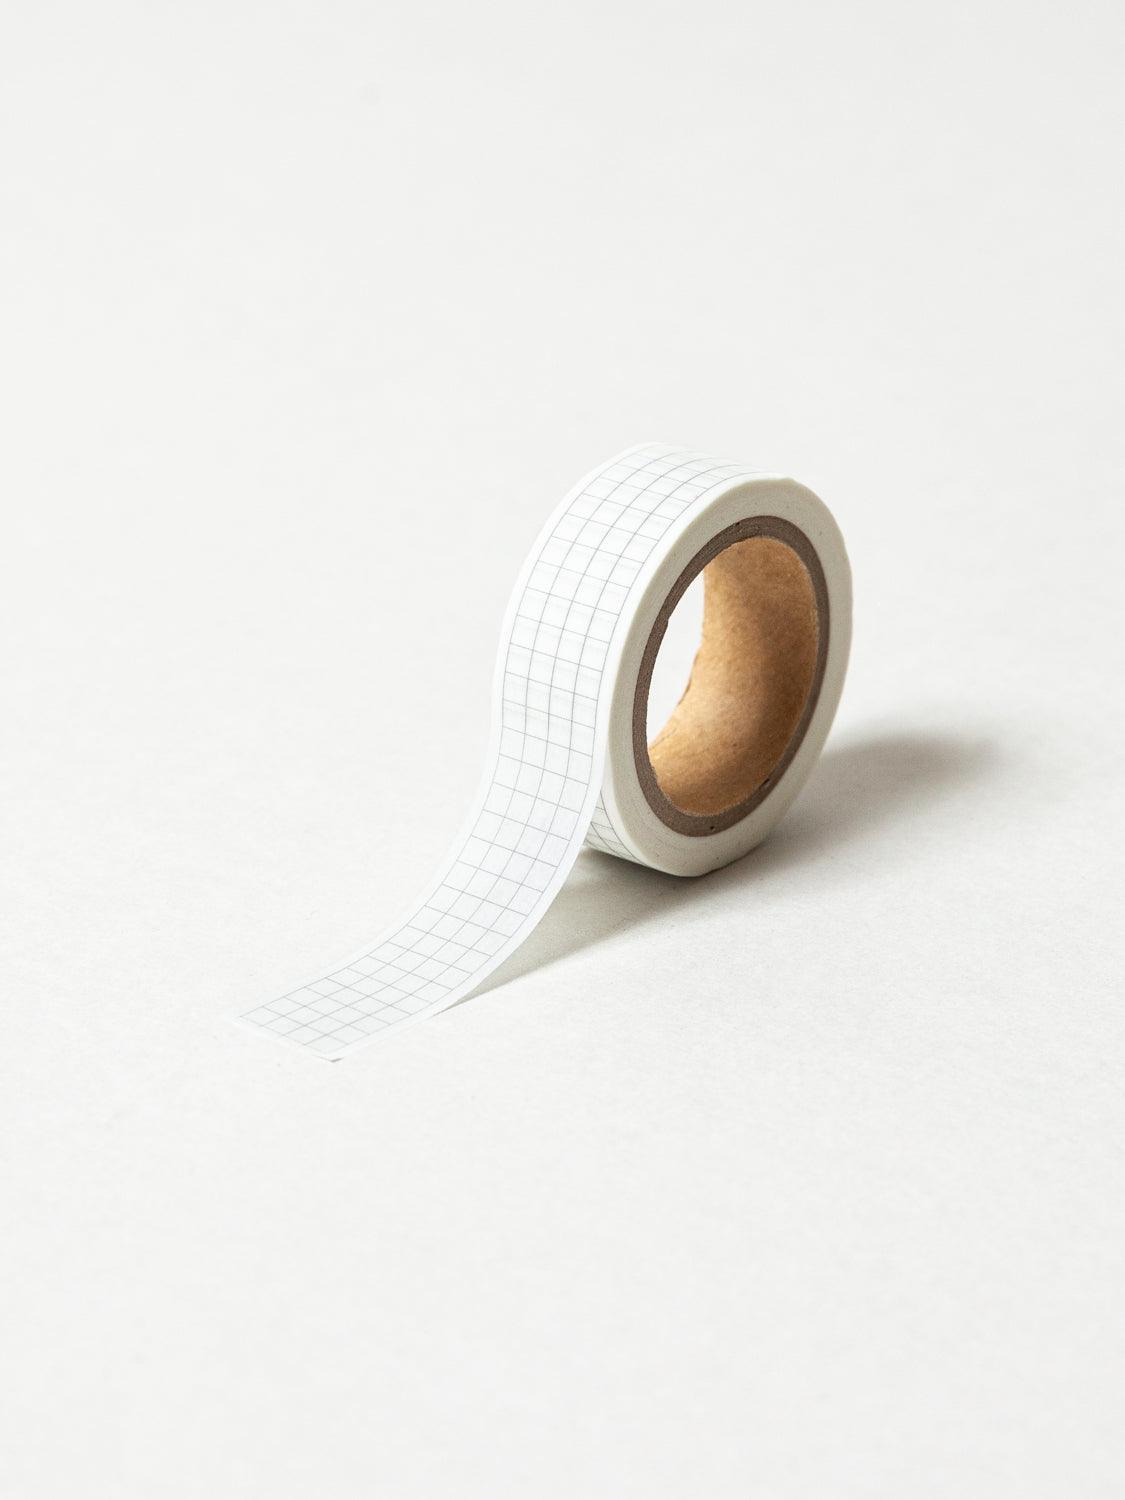 Wholesale Washi Tape Products at Factory Prices from Manufacturers